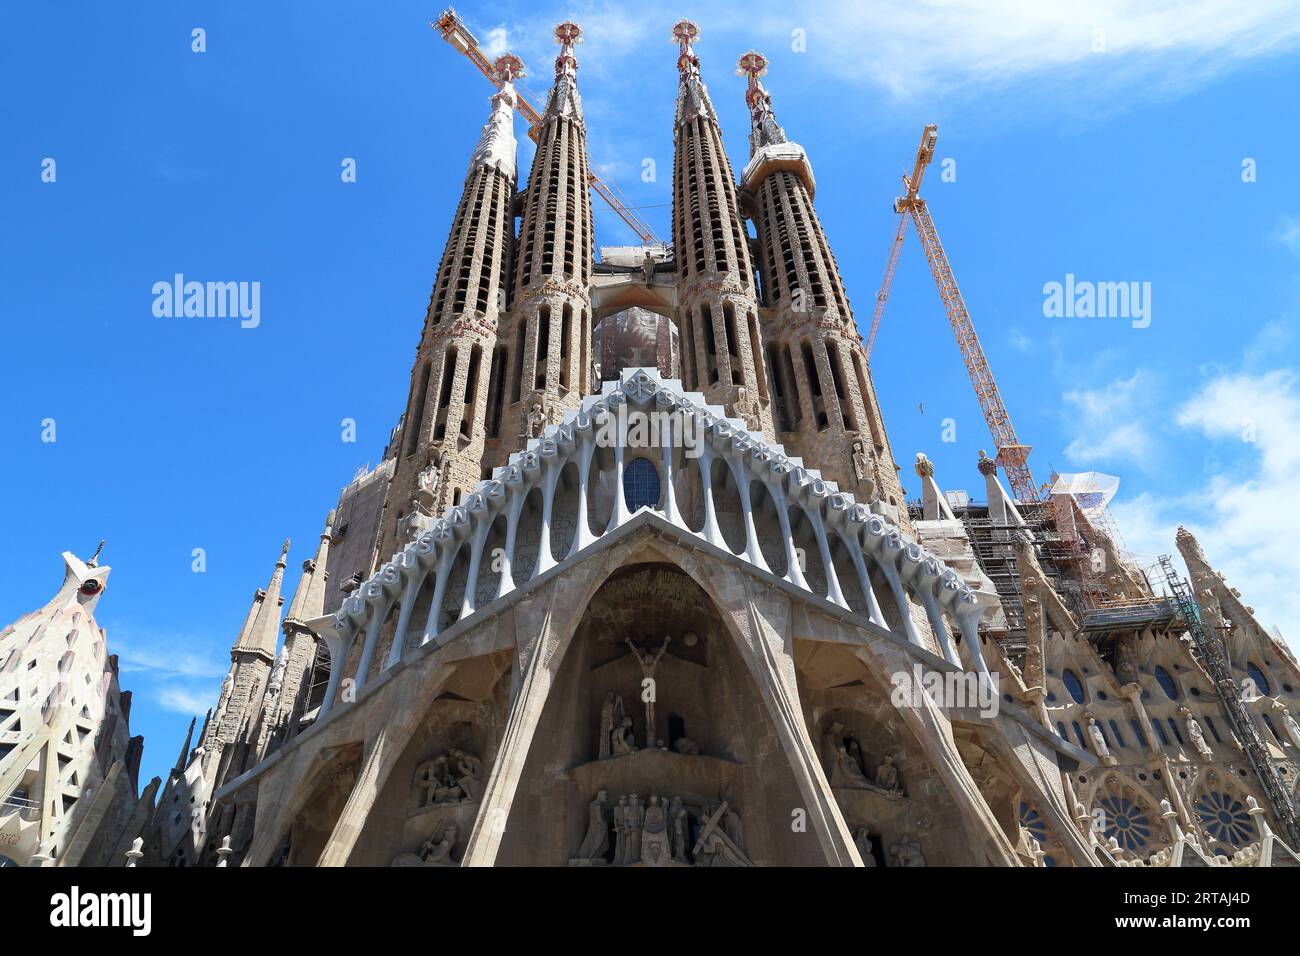 BARCELONA, SPAIN - MAY 12, 2017: This is a fragment of the construction of the towers of the facade of the Portal of the Passion of Christ of the famo Stock Photo